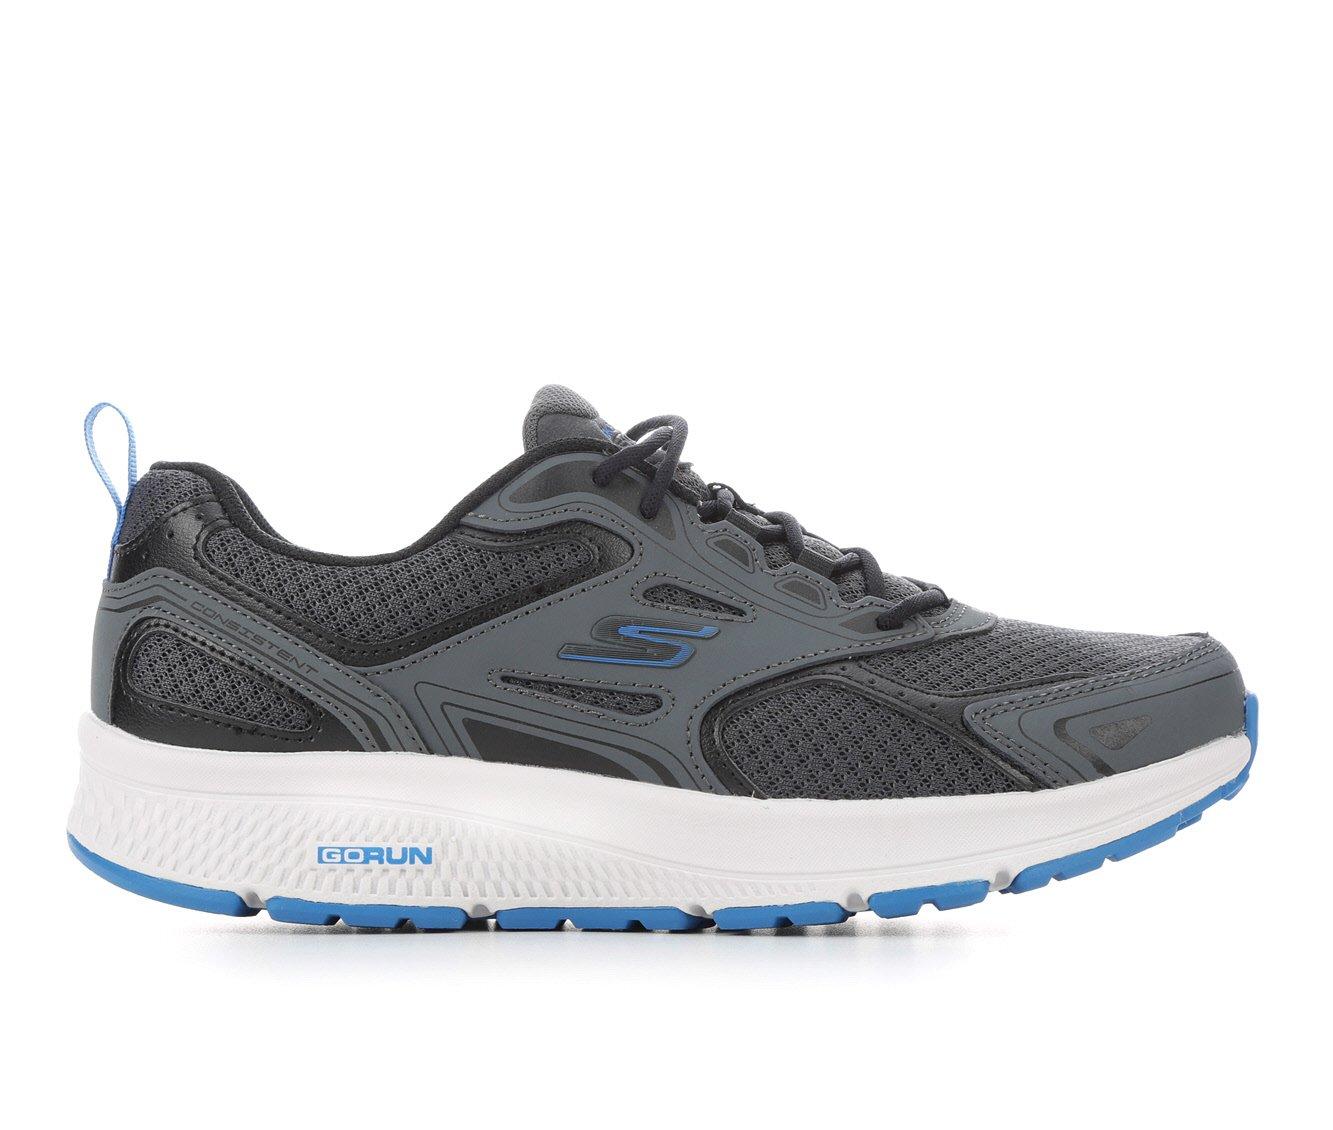 SKECHERS - Skechers GOrun Consistent™ is a well-cushioned